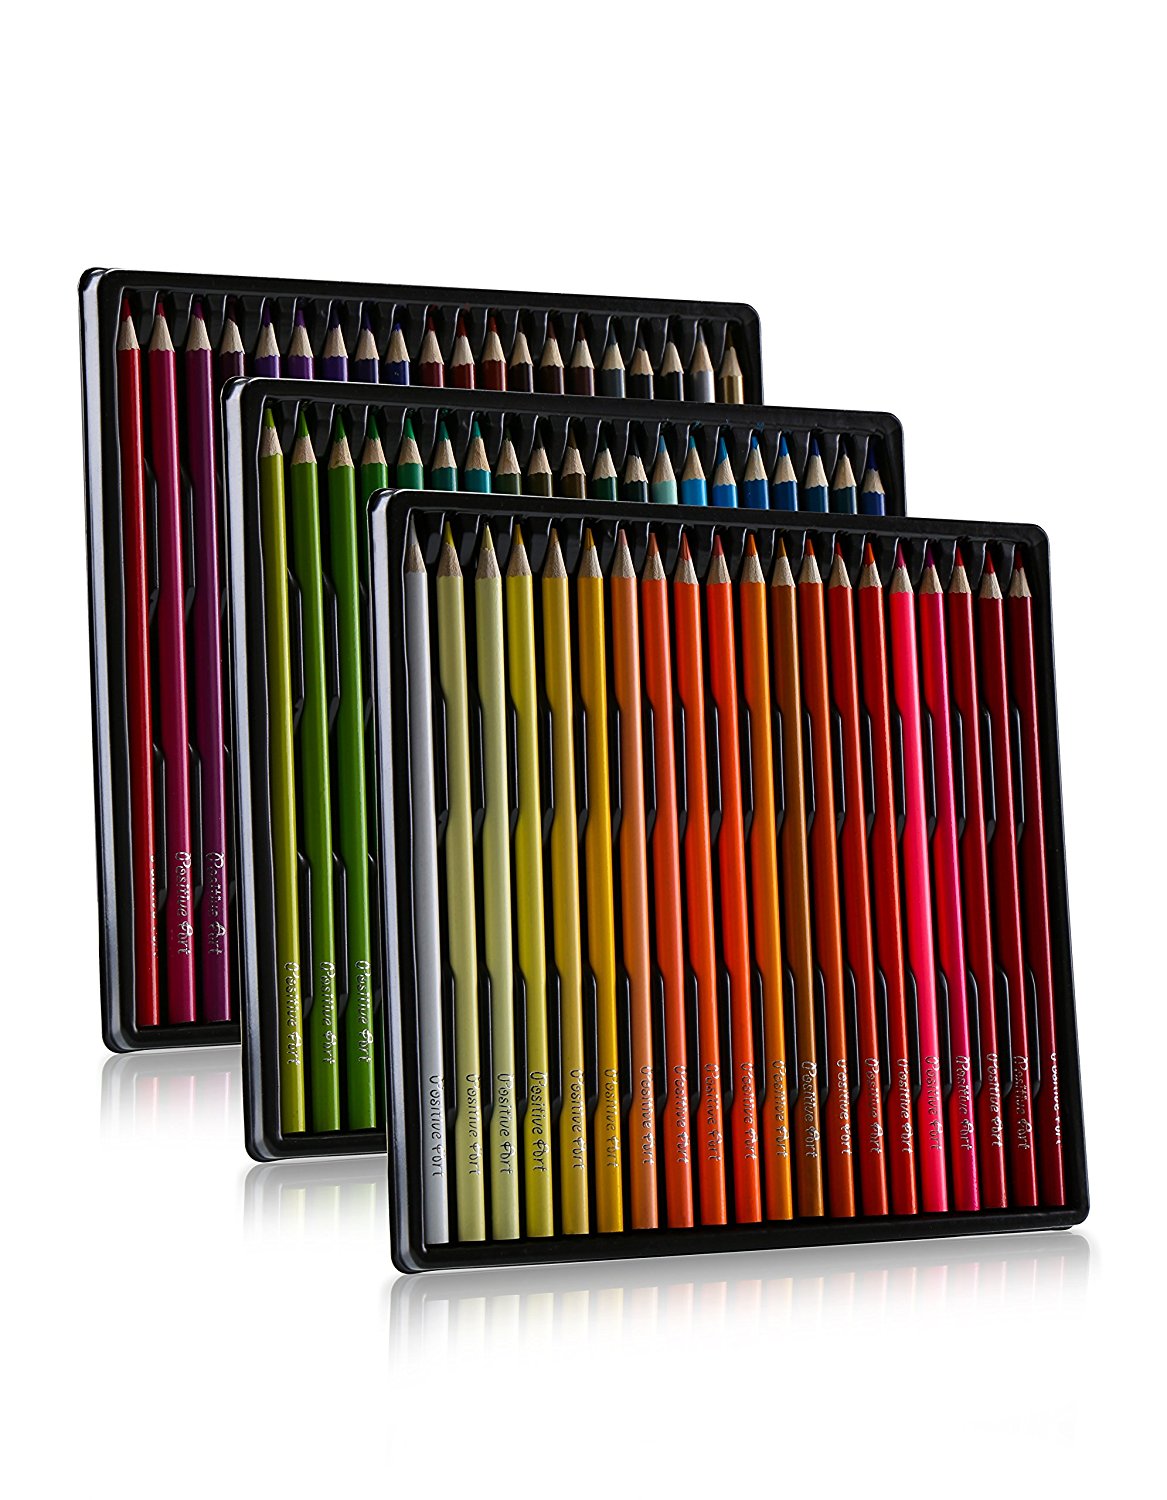 Colored Pencils 60 Unique Colors Premium Pre-sharpened Perfect for adult  coloring books,Drawing, Sketching, and Crafting Projects, Bold,Vibrant  Colors, 3.3mm Precision Tips 